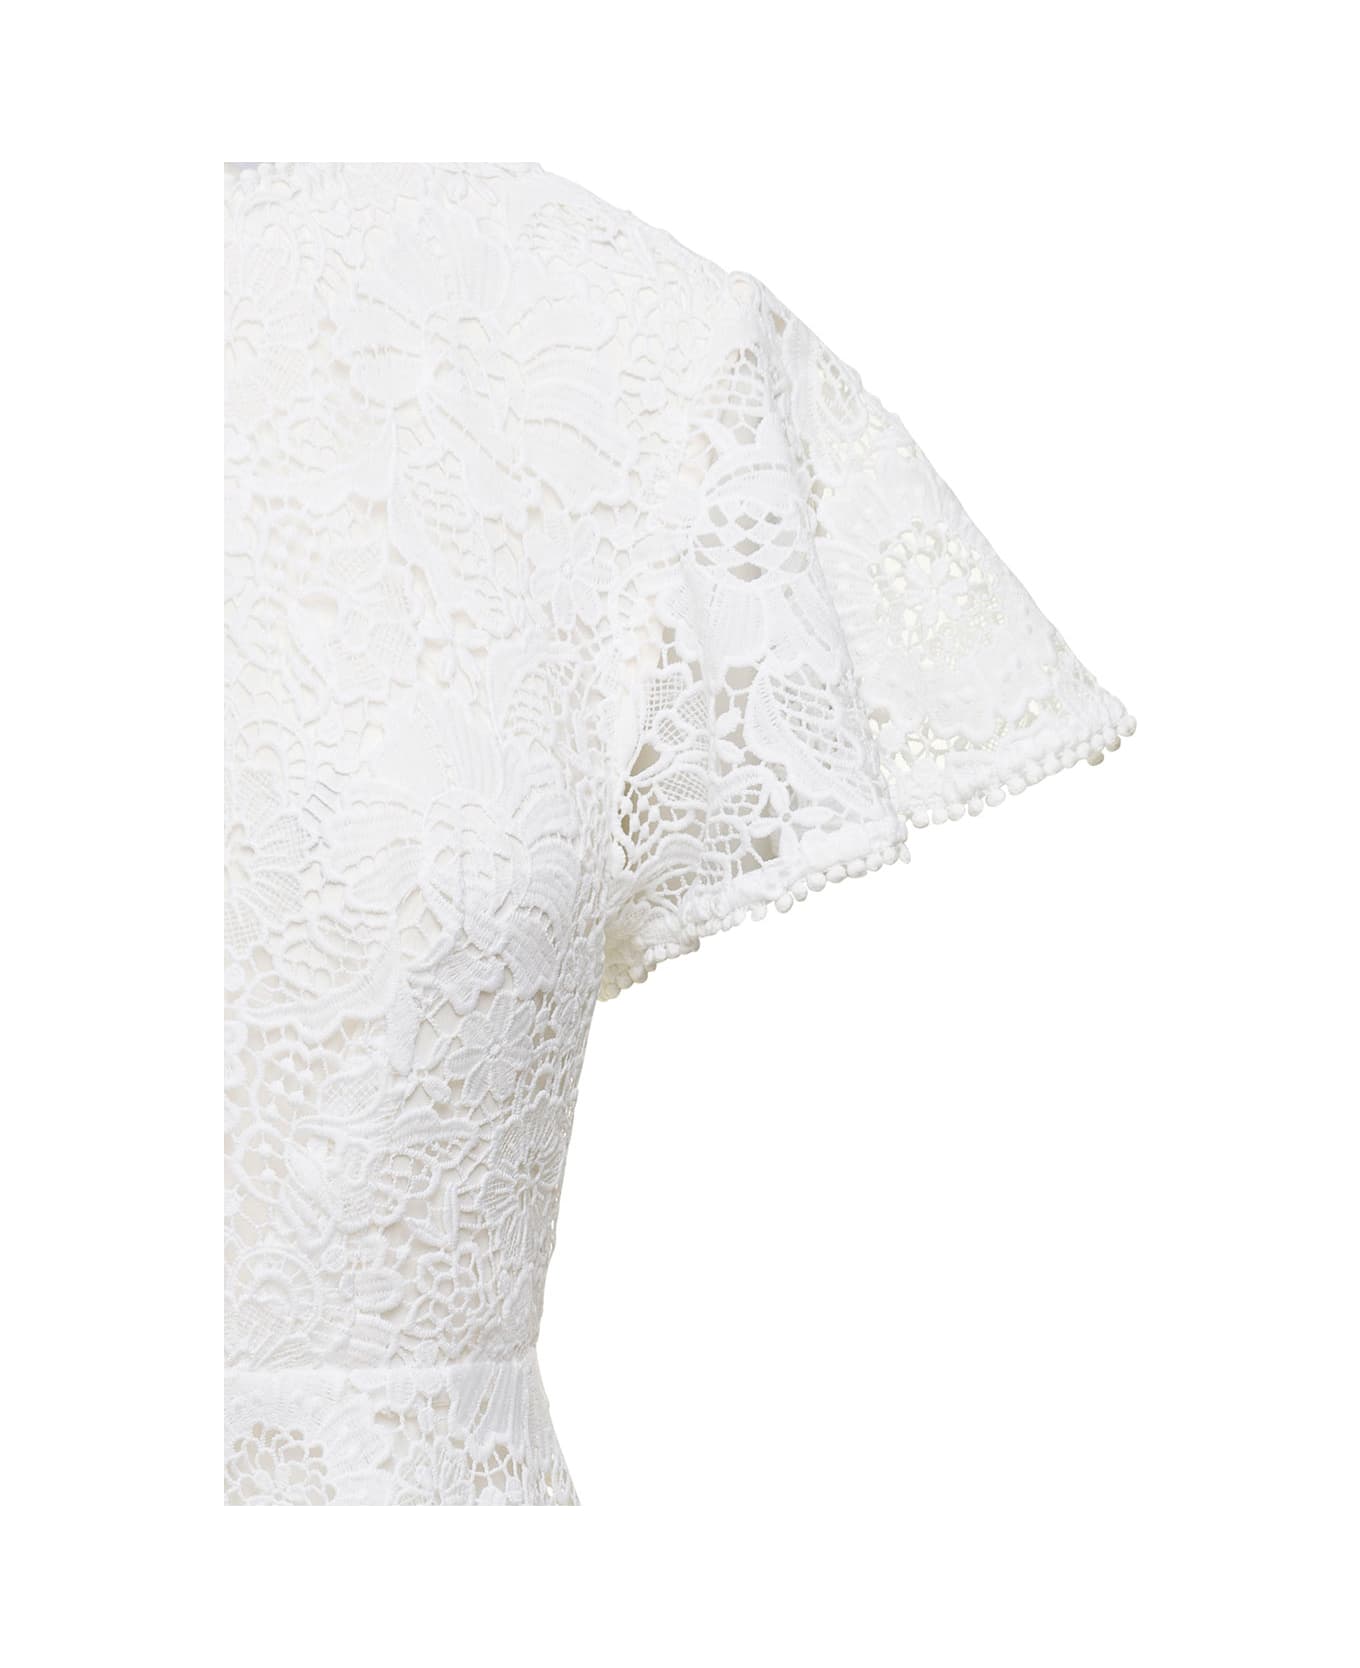 Sabina Musayev 'sue' Mini White Dress With Cut-out At The Back In Lace Woman - White